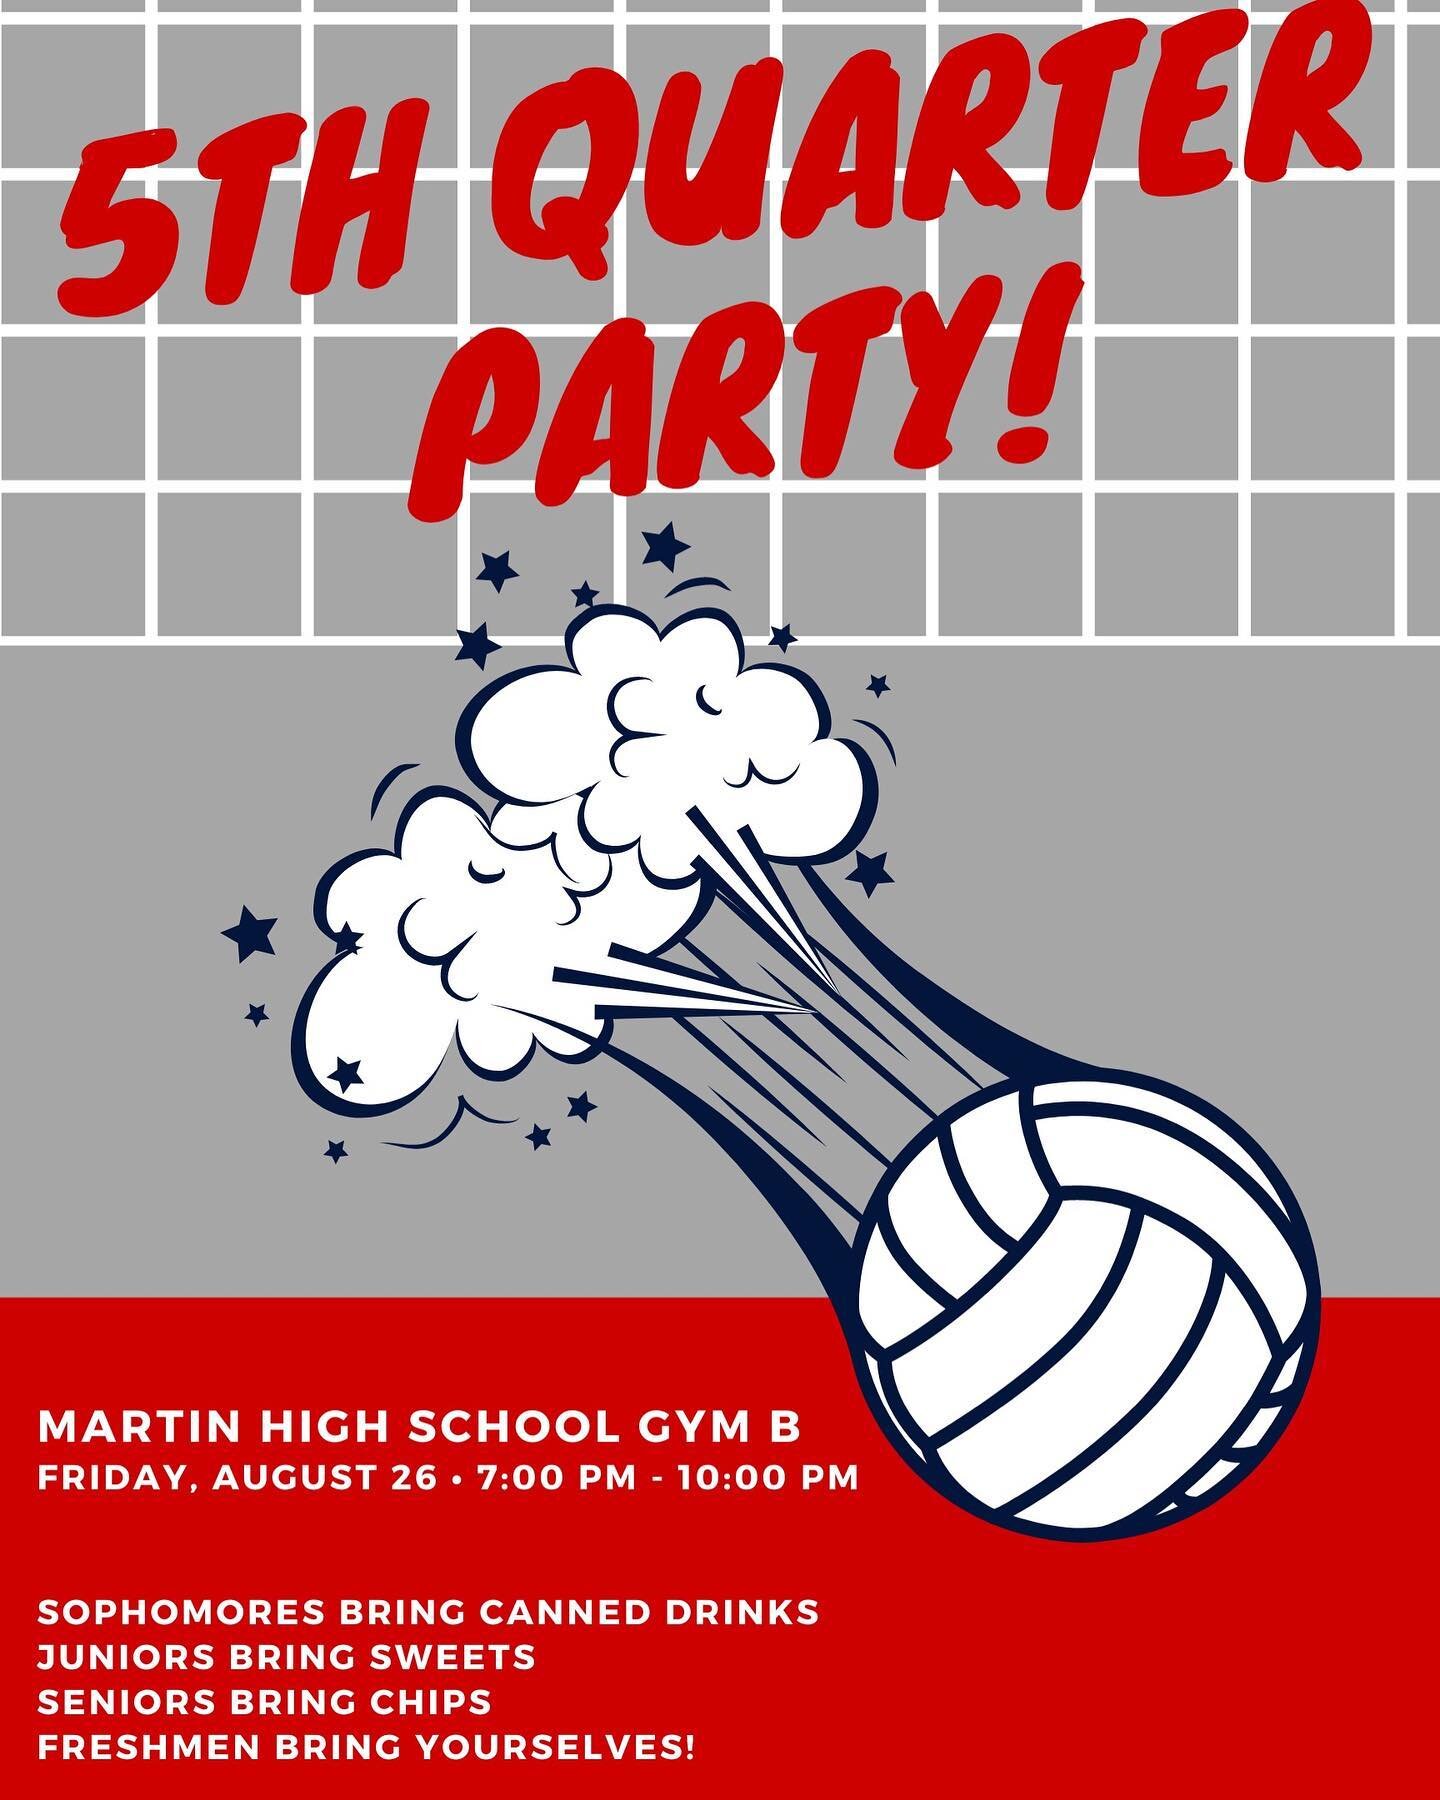 The 5th Quarter Party is next week😁‼️ Come to play volleyball with your choir friends and sign up for a team next week and get ready to PARTY😁‼️🎉🏐